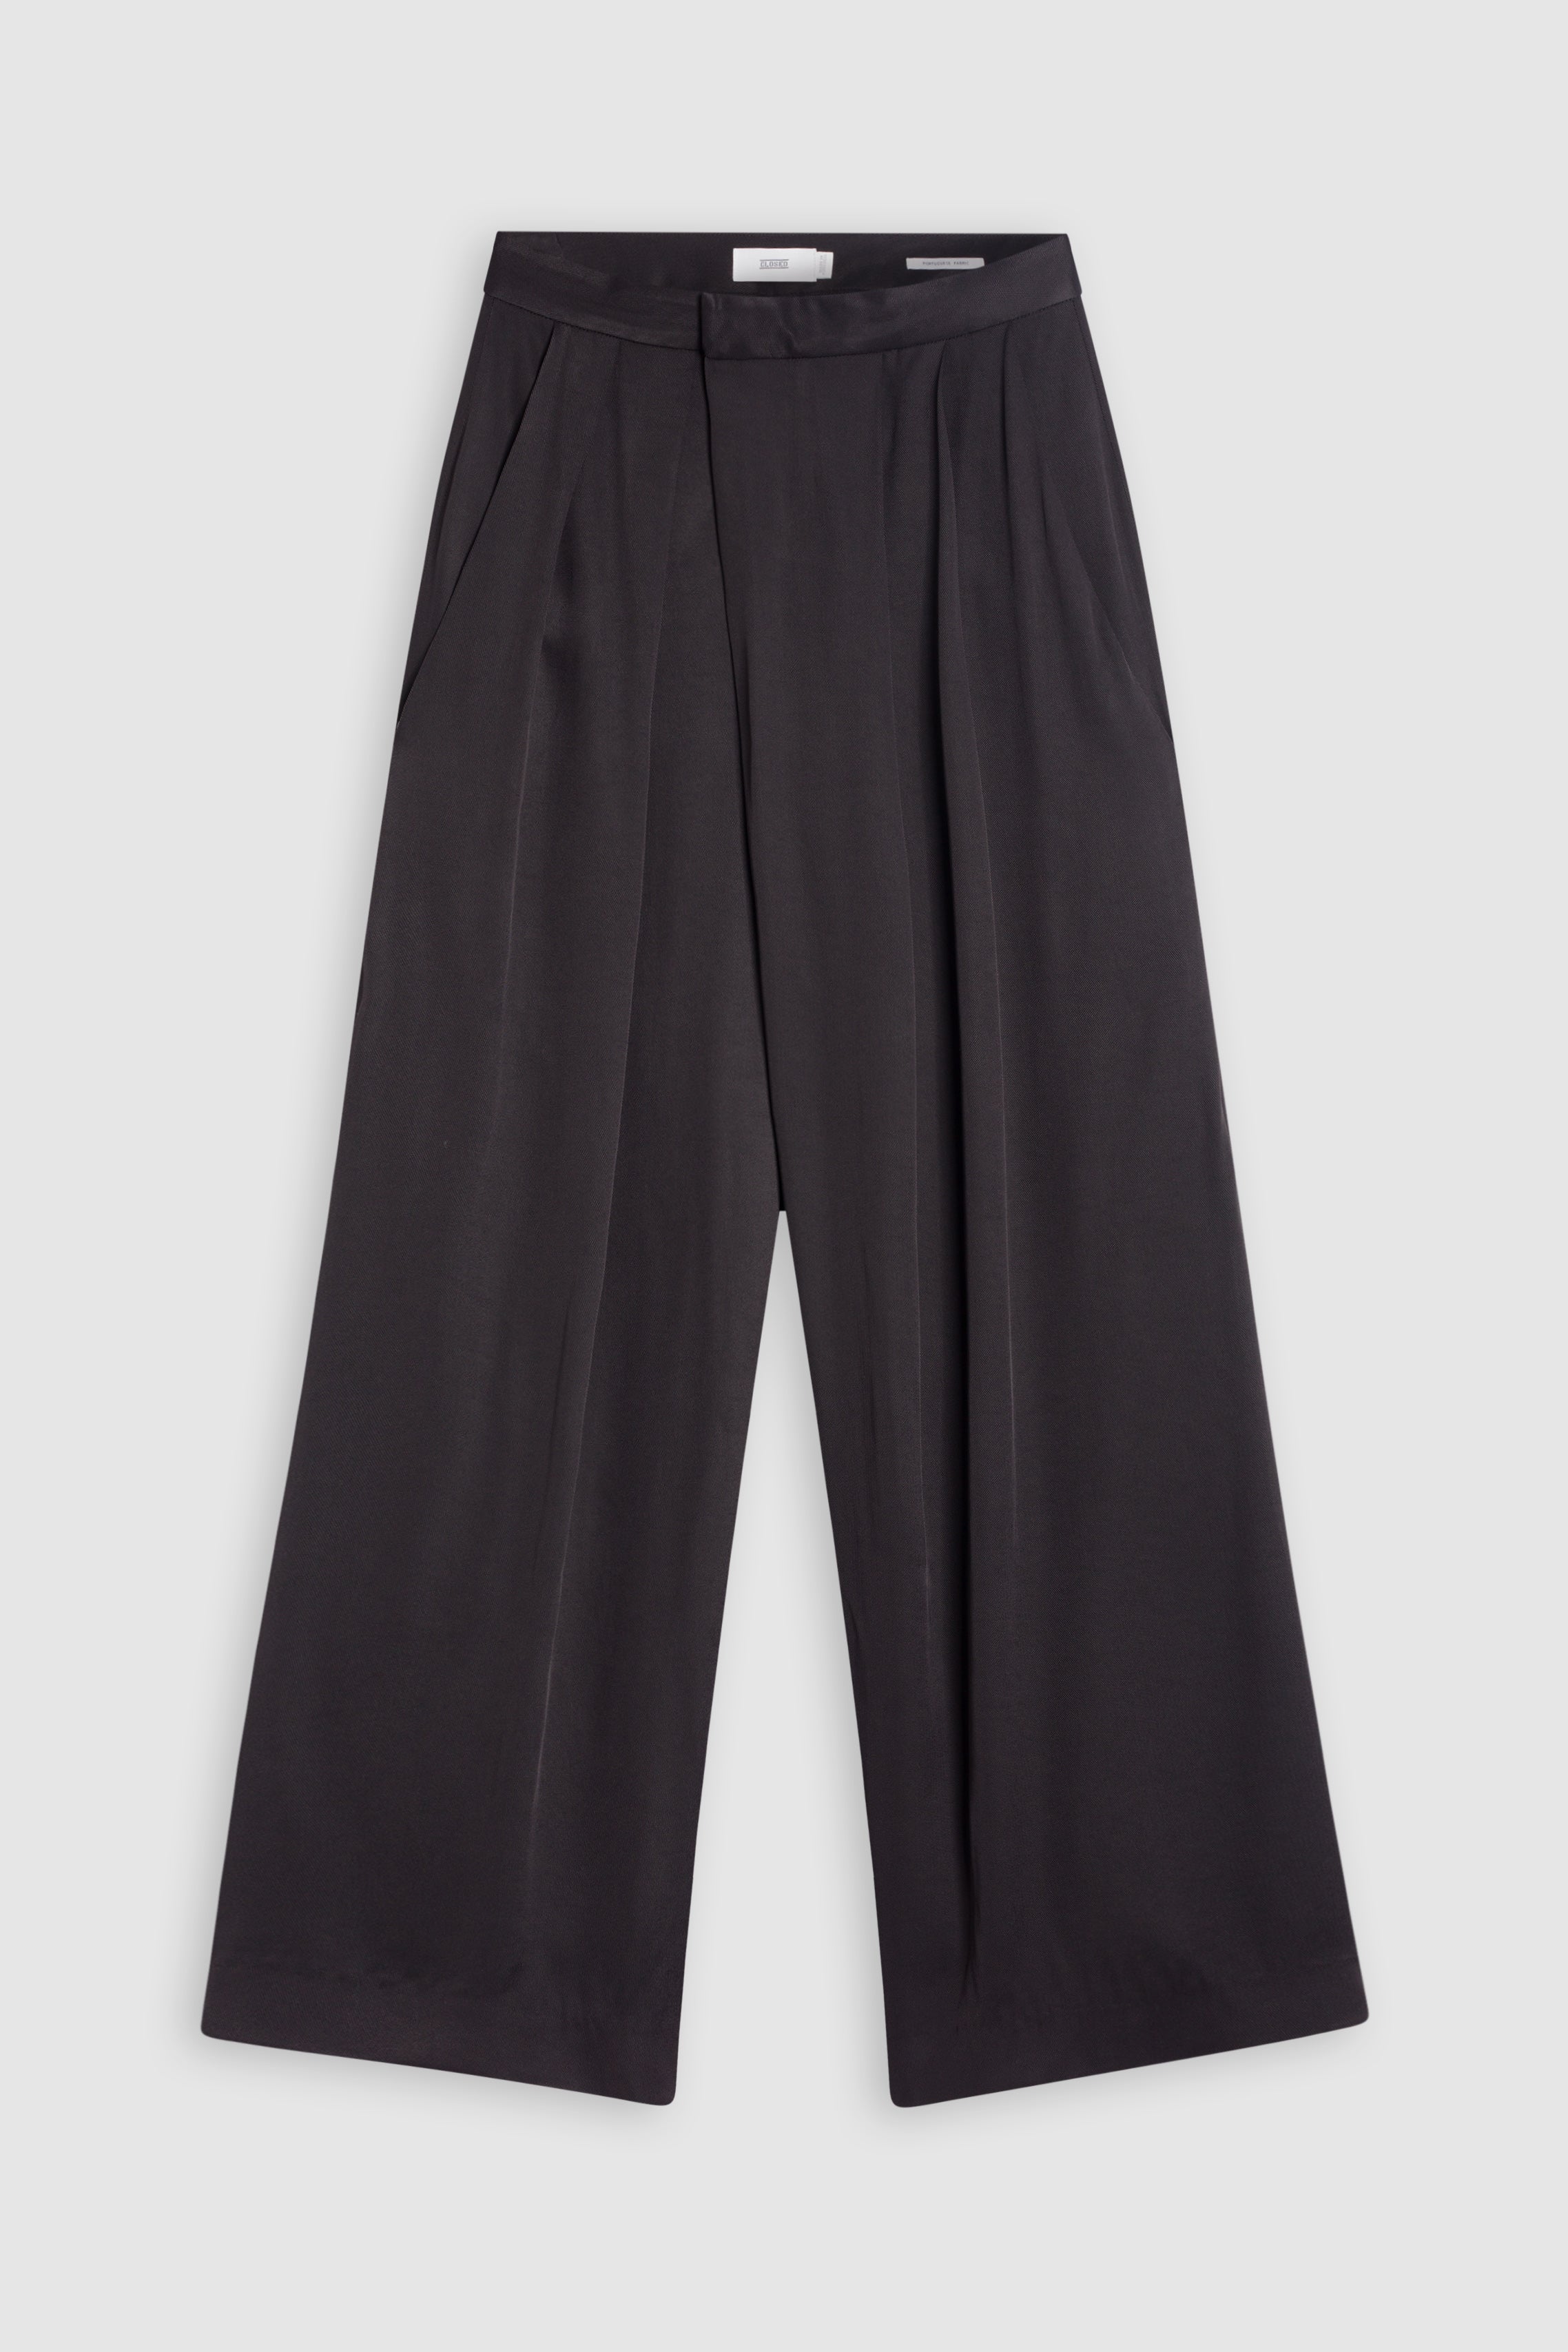 CLOSED-OUTLET-SALE-STYLE-NAME-ZOLA-PANTS-Hosen-ARCHIVE-COLLECTION-4.jpg